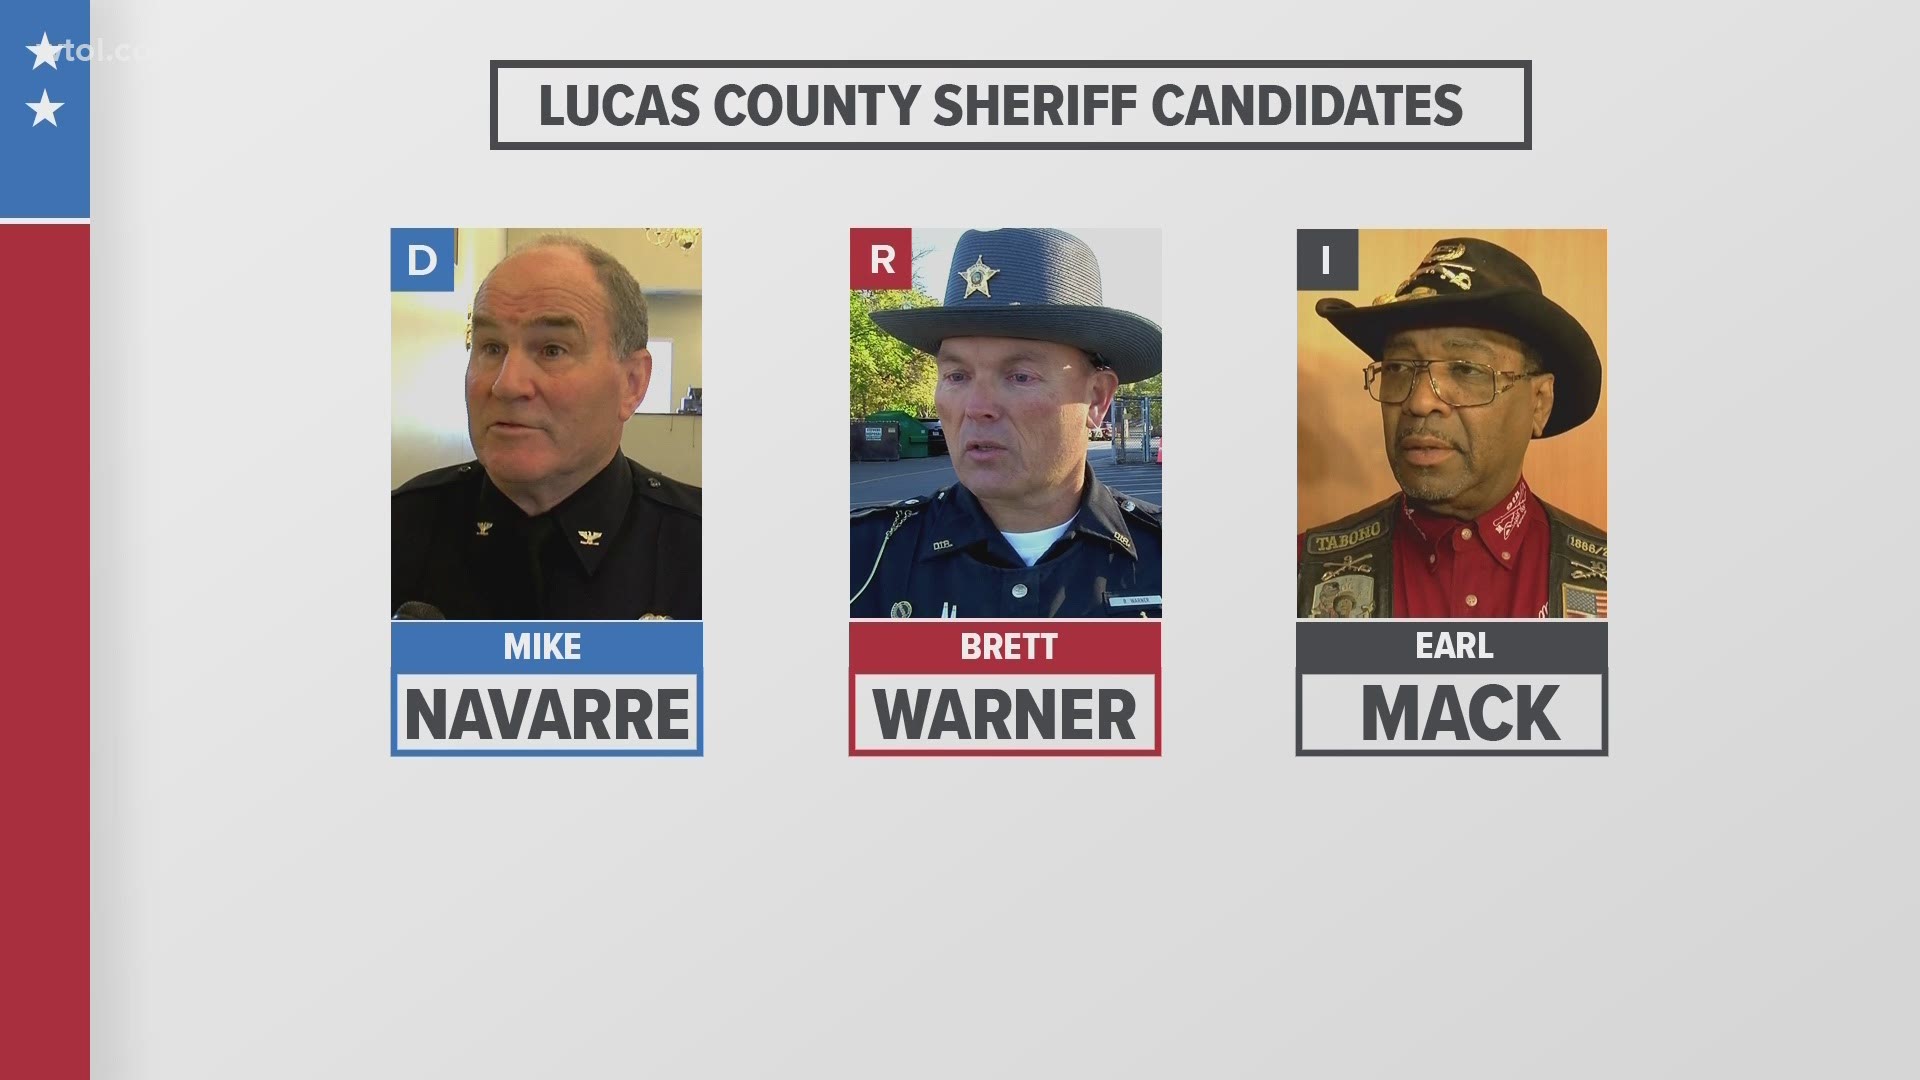 Three candidates are running to replace John Tharpe as Lucas County Sheriff. Combined, the three have over 100 years of law enforcement experience.